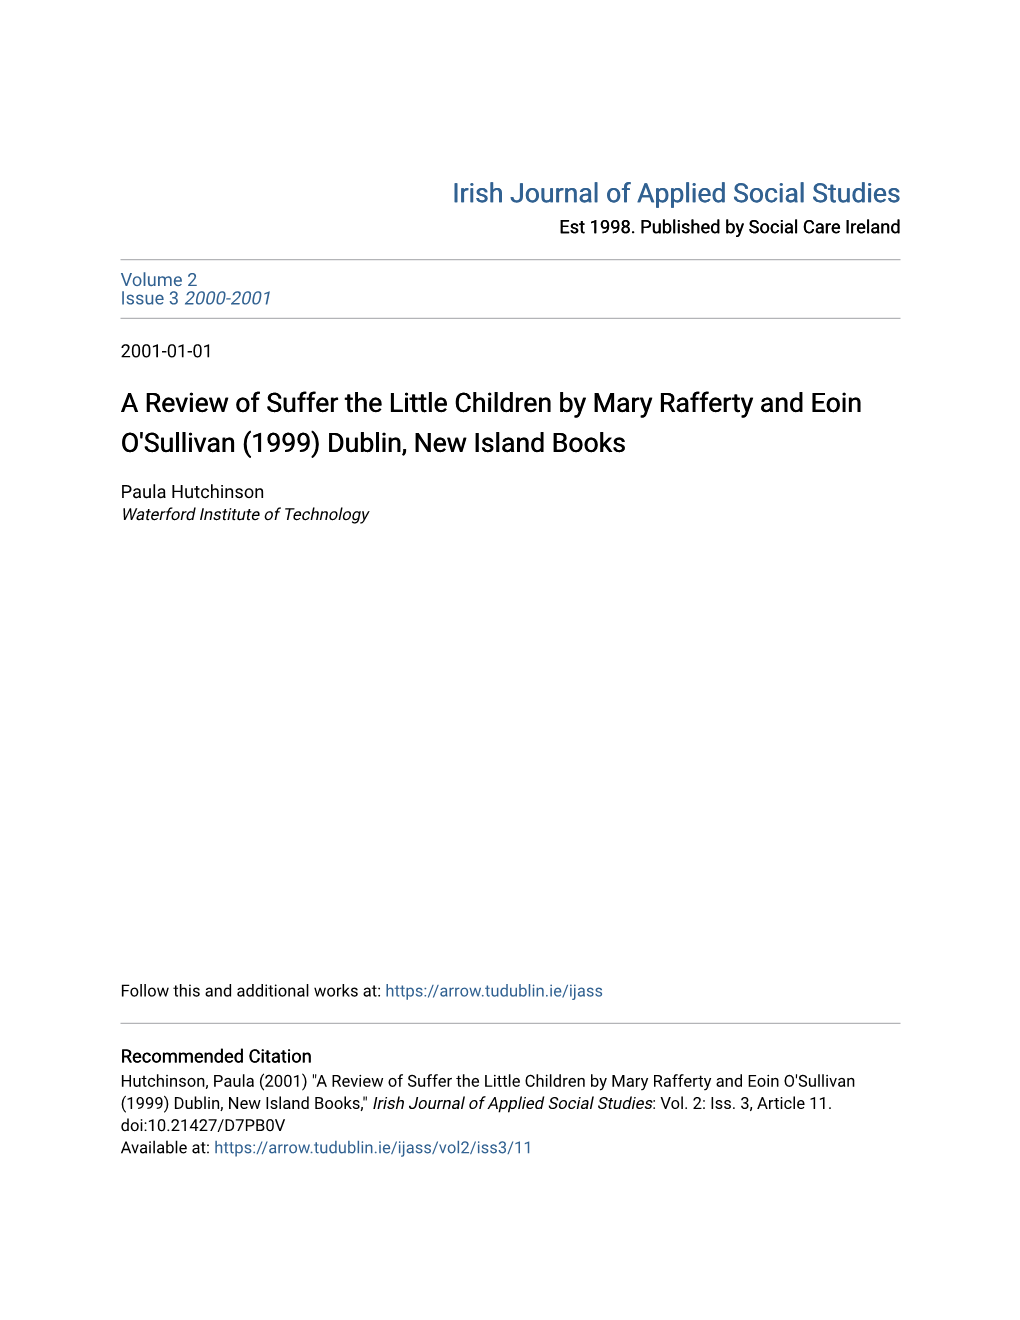 A Review of Suffer the Little Children by Mary Rafferty and Eoin O'sullivan (1999) Dublin, New Island Books